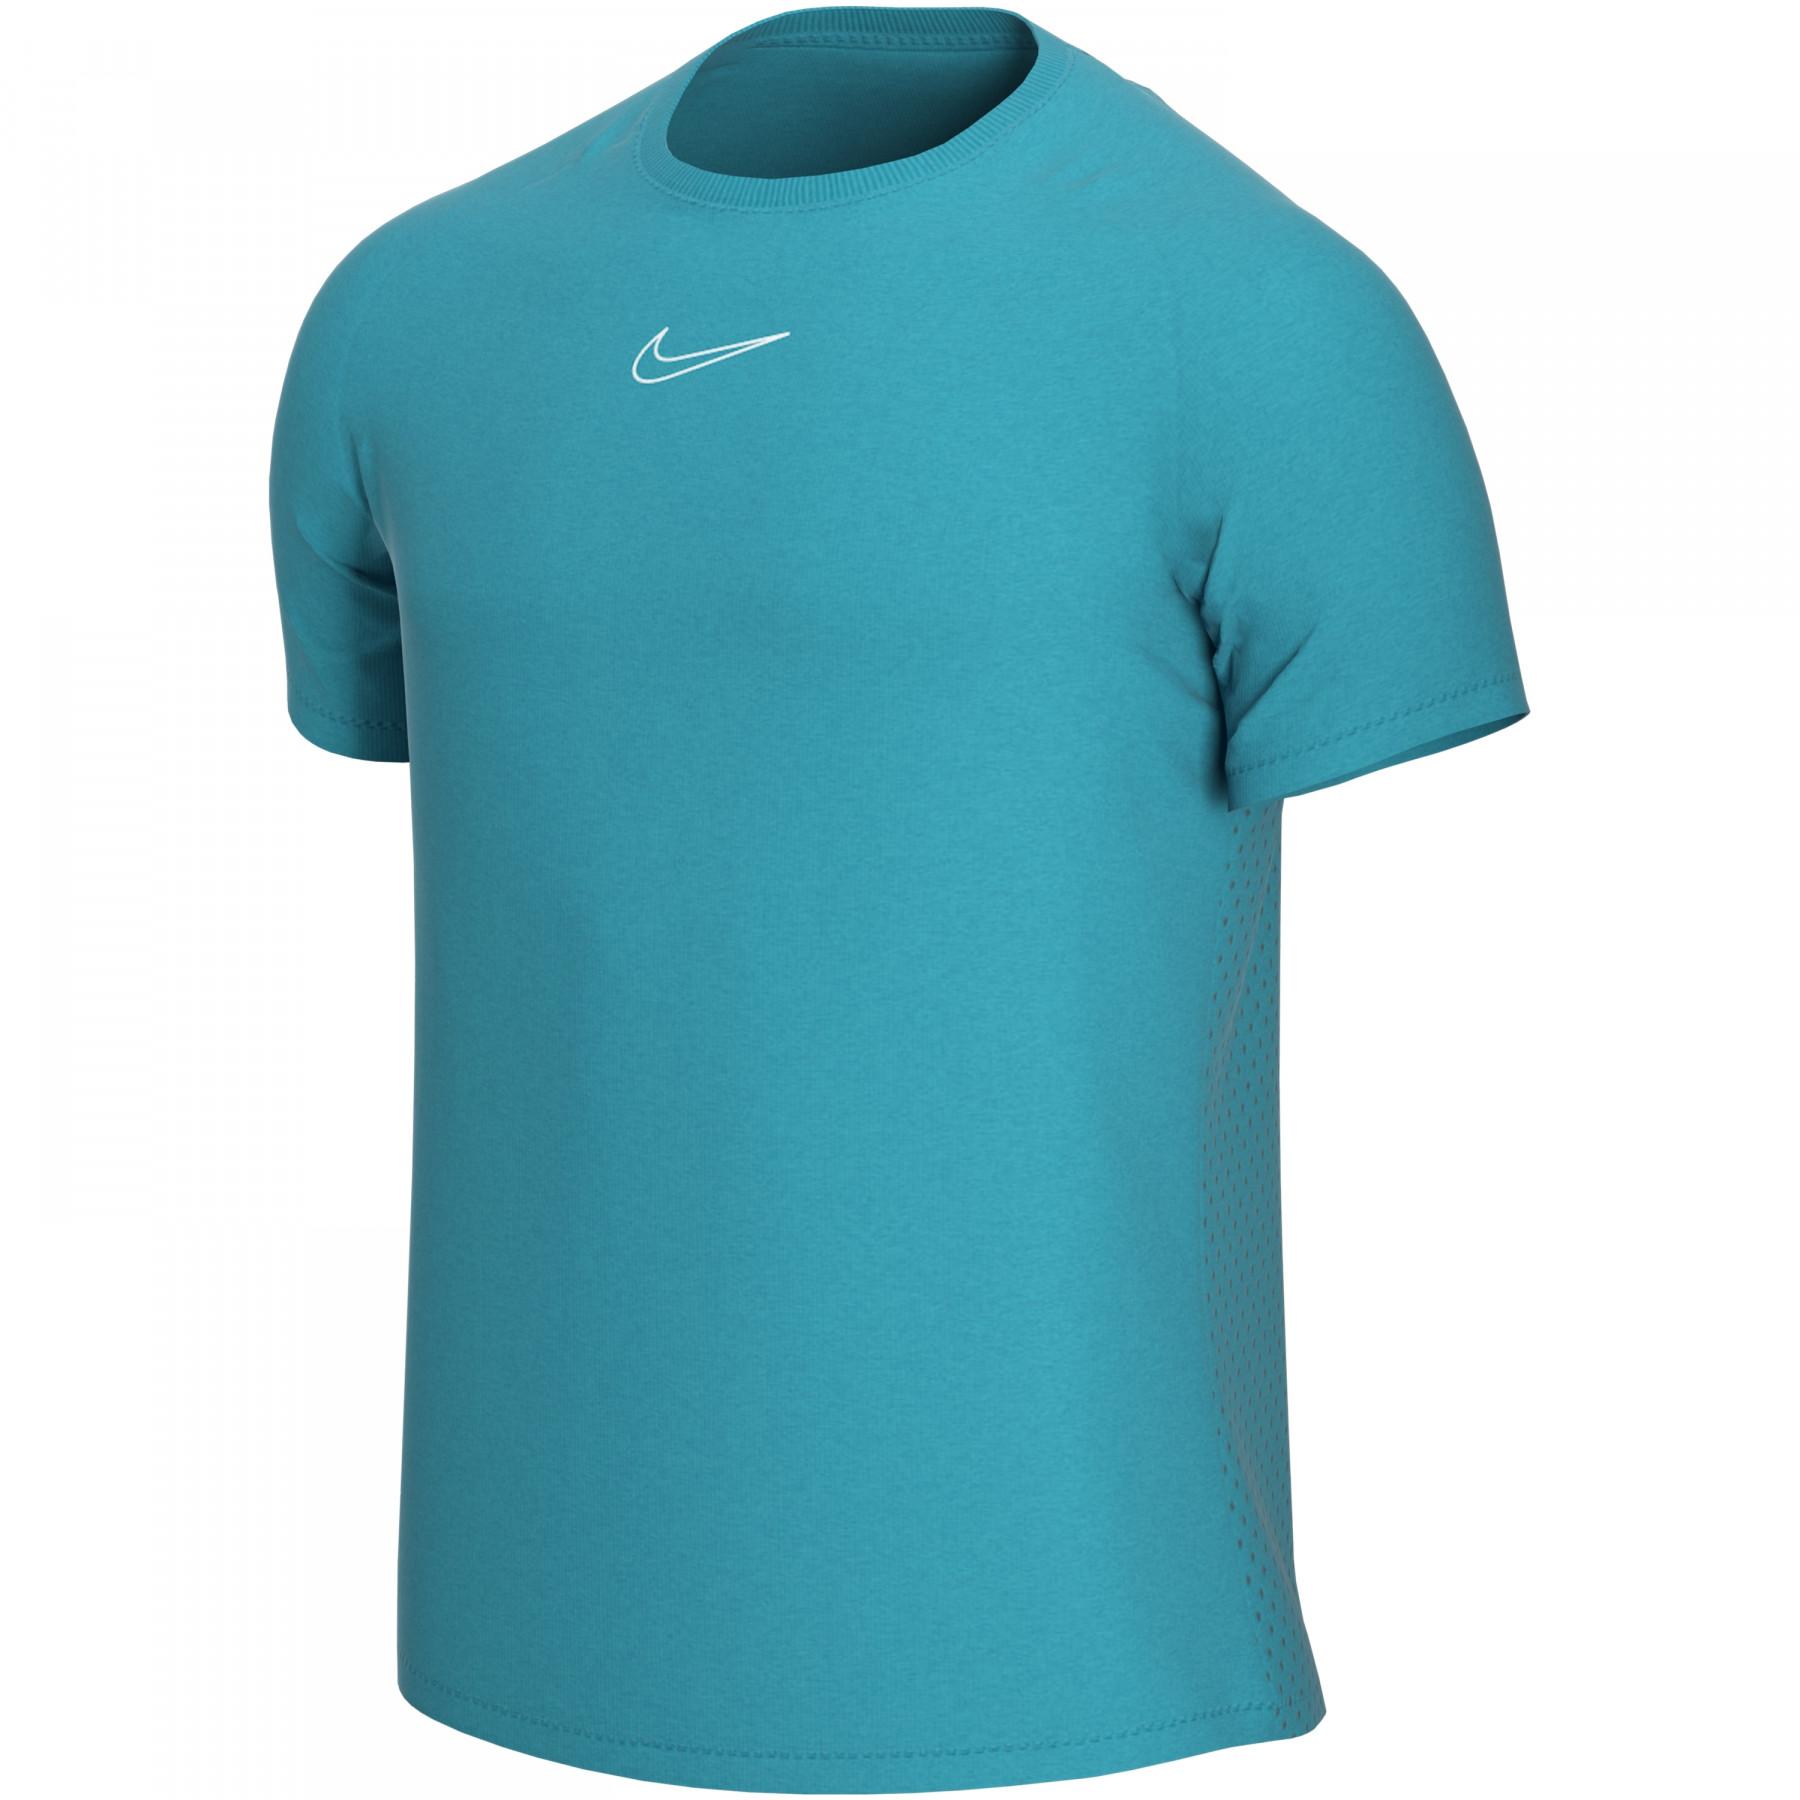 Jersey Nike Dry ACD